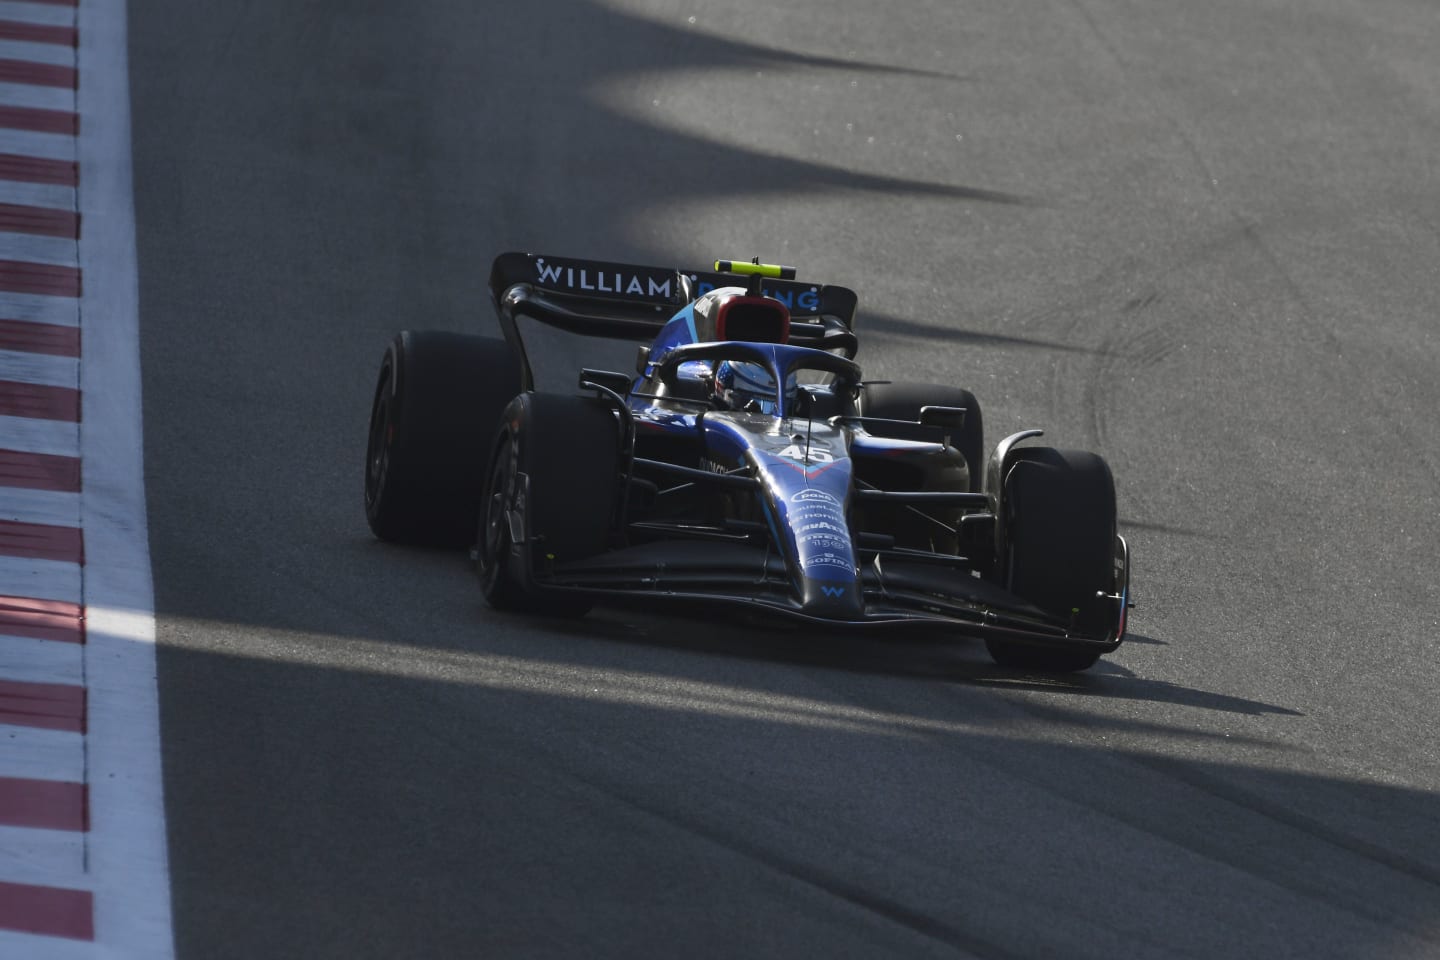 ABU DHABI, UNITED ARAB EMIRATES - NOVEMBER 18: Logan Sargeant of United States driving the (45) Williams FW44 Mercedes on track during practice ahead of the F1 Grand Prix of Abu Dhabi at Yas Marina Circuit on November 18, 2022 in Abu Dhabi, United Arab Emirates. (Photo by Rudy Carezzevoli/Getty Images)